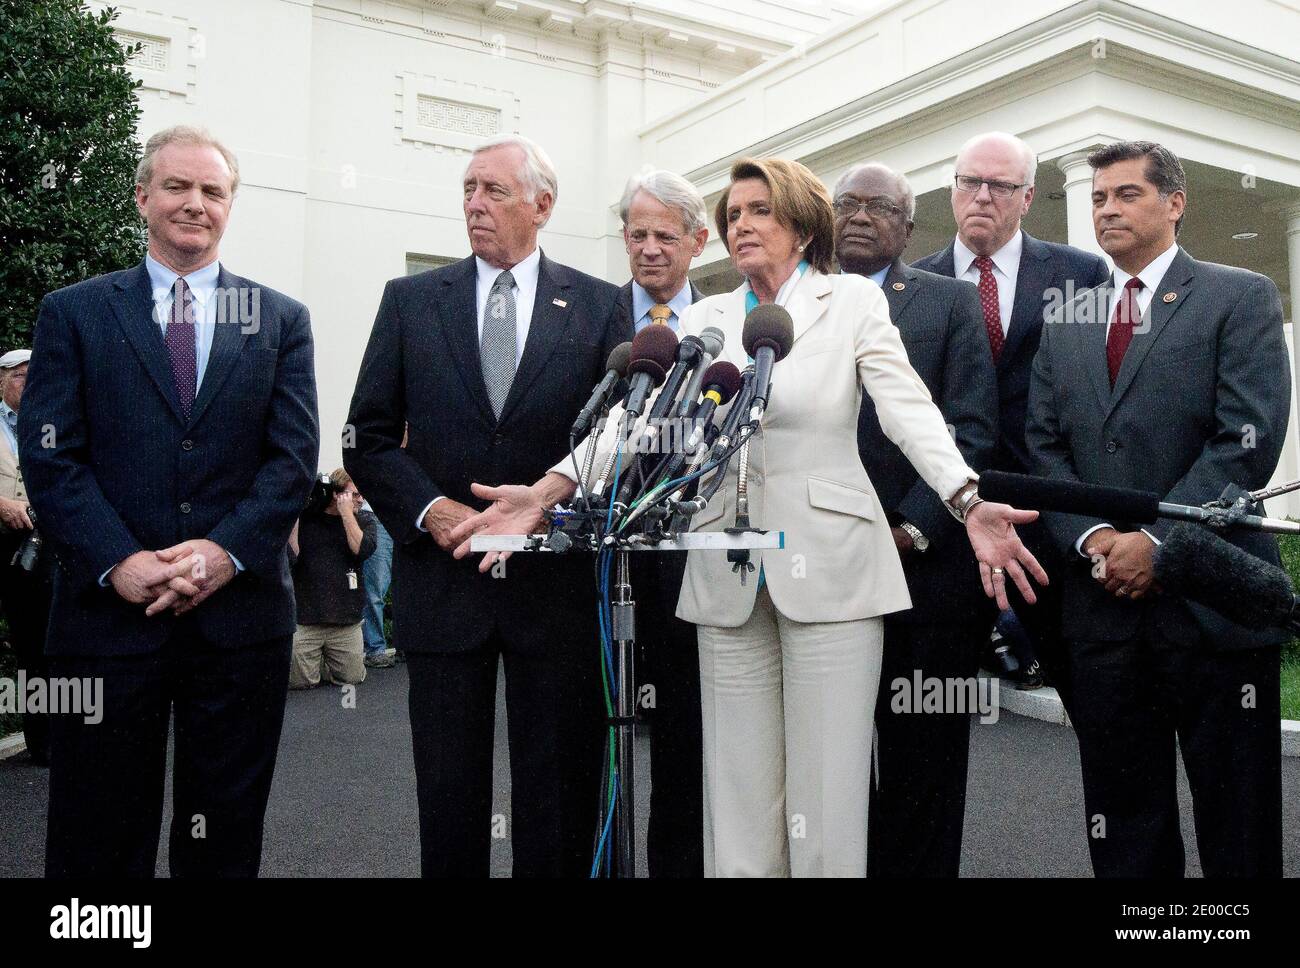 United States House Democratic Leader Nancy Pelosi (Democrat of California) makes remarks to reporters following her meeting with U.S. President Barack Obama at the White House in Washington, D.C. on Tuesday, October 15, 2013. From left to right: U.S. Representative Chris Van Hollen (Democrat of Maryland), U.S. House Democratic Whip Steny Hoyer (Democrat of Maryland), U.S. Representative Steve Israel (Democrat of New York), Leader Pelosi, U.S. Representative Joseph Crowley (Democrat of New York), U.S. House Assistant Democratic Leader James Clyburn (Democrat of South Carolina), and U.S. Repres Stock Photo